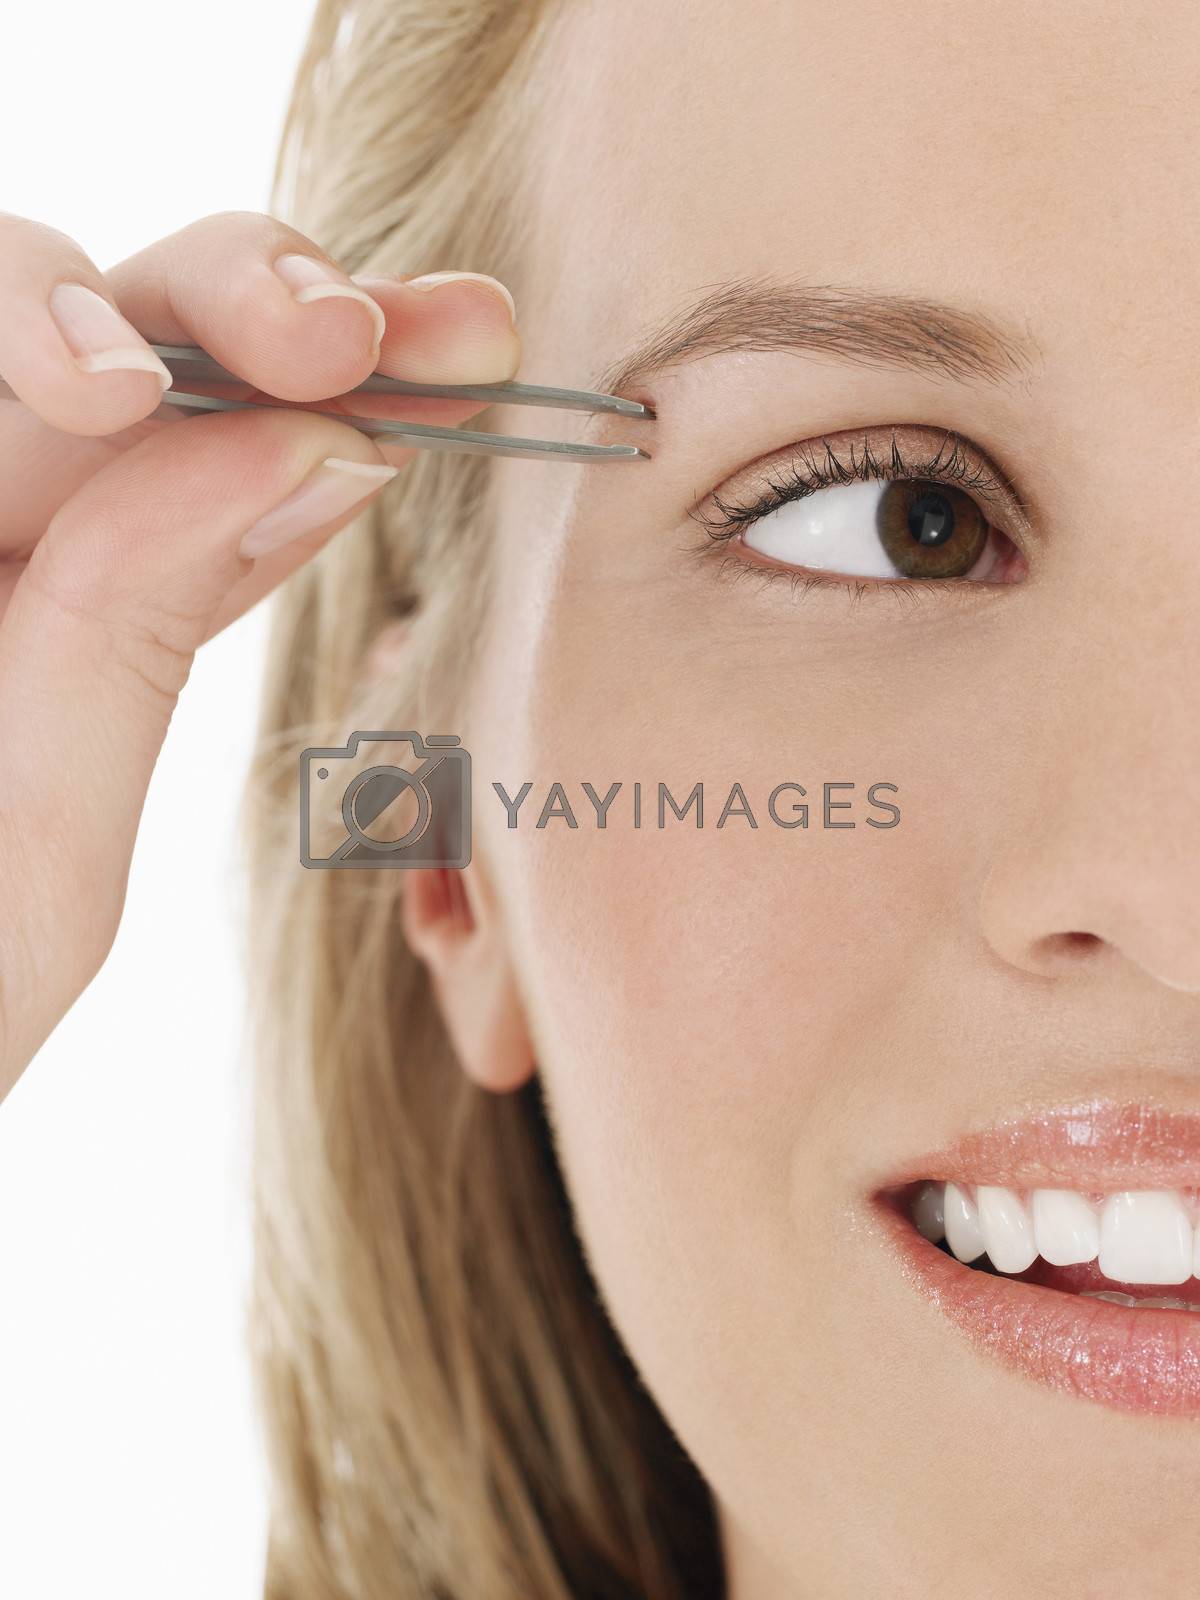 Royalty free image of Young Woman plucking Eyebrow close up cropped by moodboard